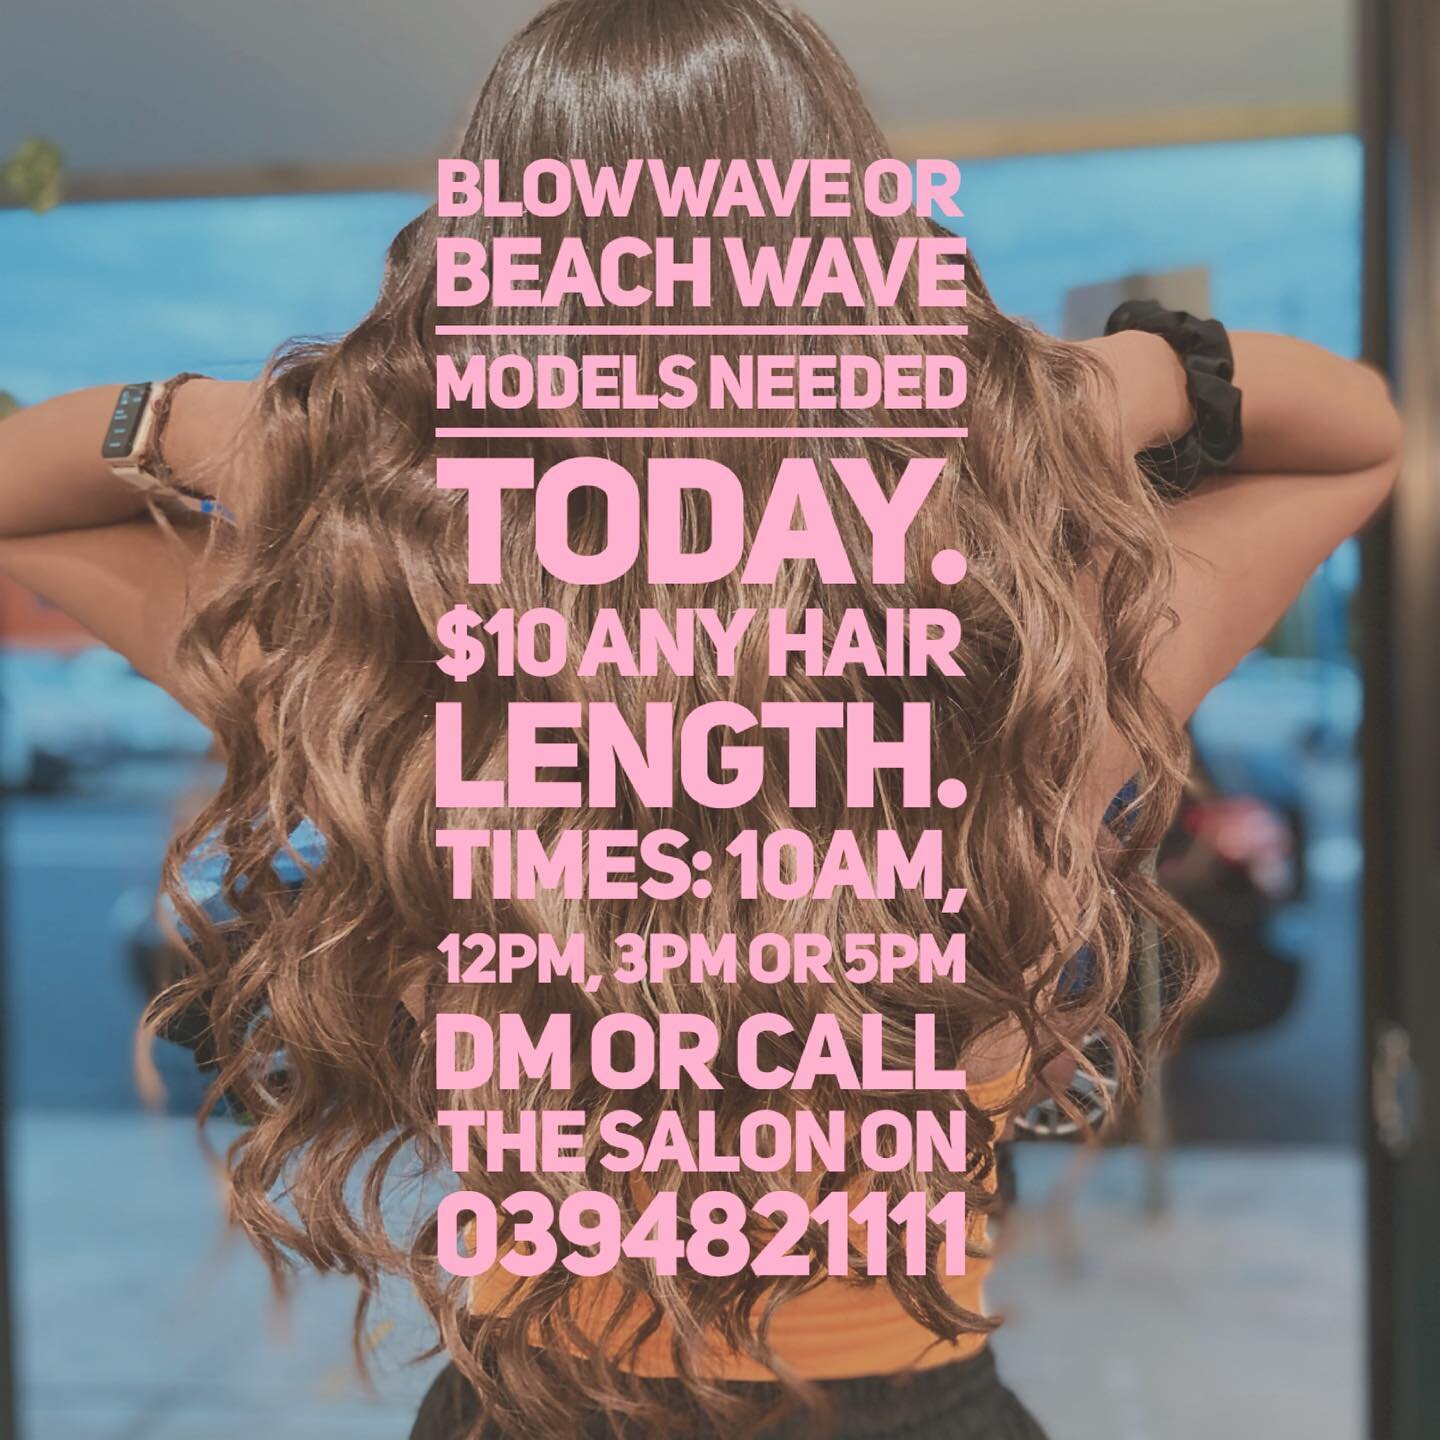 Treat yourself with the gorgeous Ian or share, share and share with your friends💕 #hairmodelmelbourne #blowdry #beachwaves